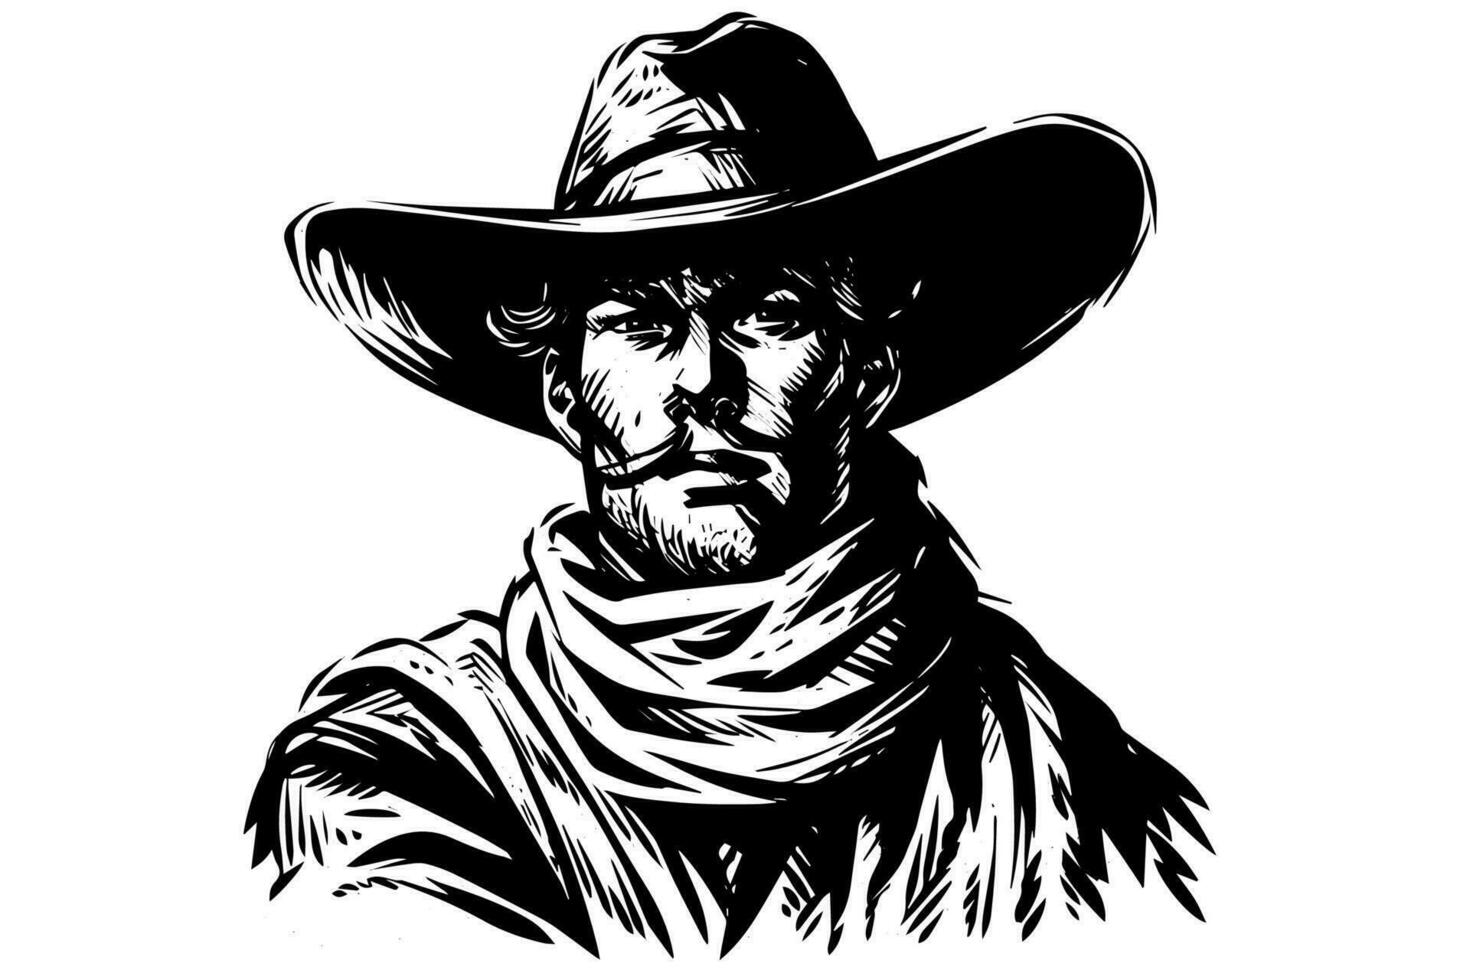 Cowboy bust or head on hat in engraving style. Hand drawn ink sketch. Vector illustration.